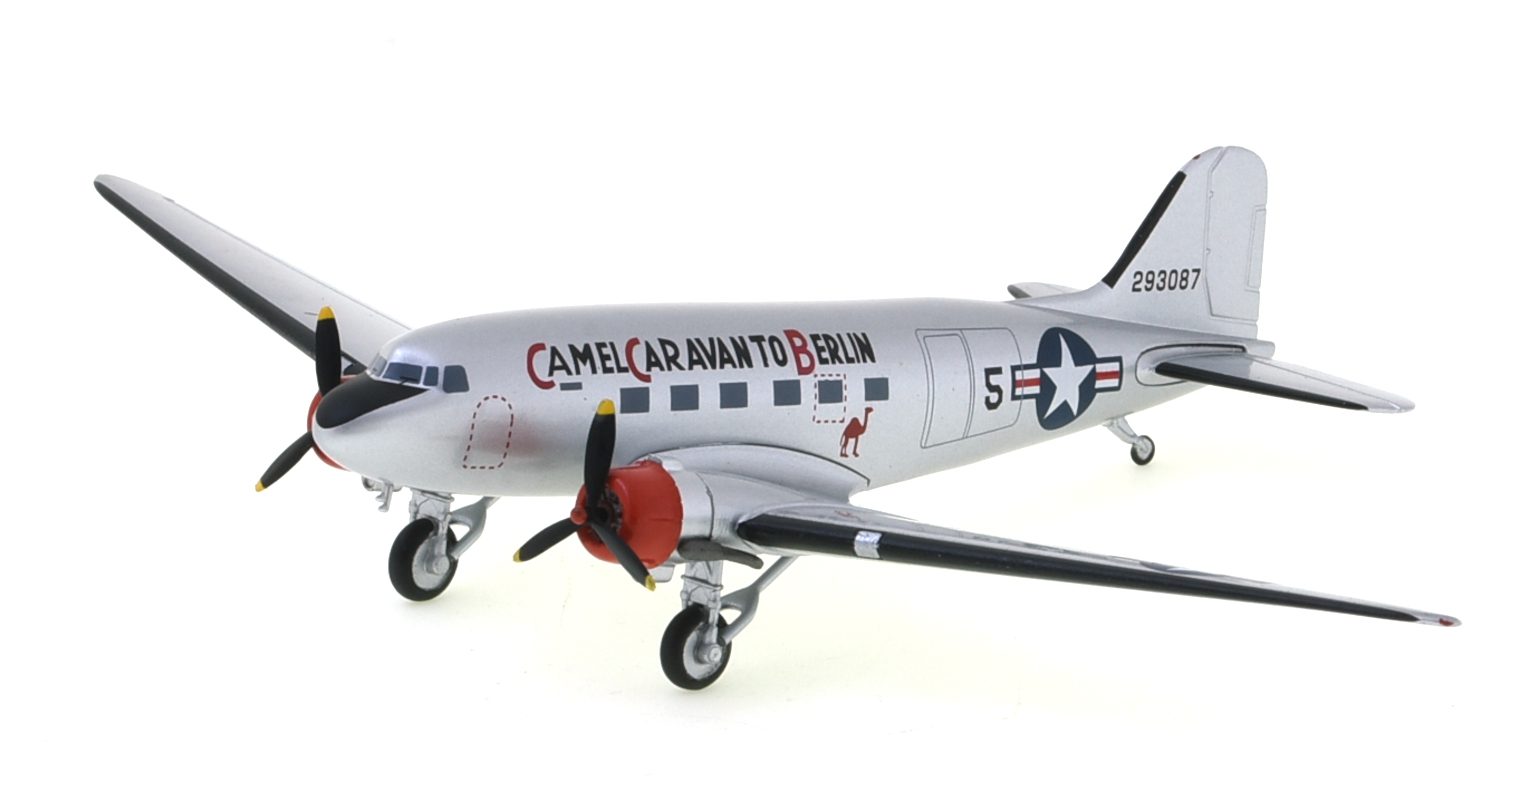 Front port side view of Hobby Master HL1307 - 1/200 scale diecast model of the Douglas C-47A (DC-3) Skytrain, 